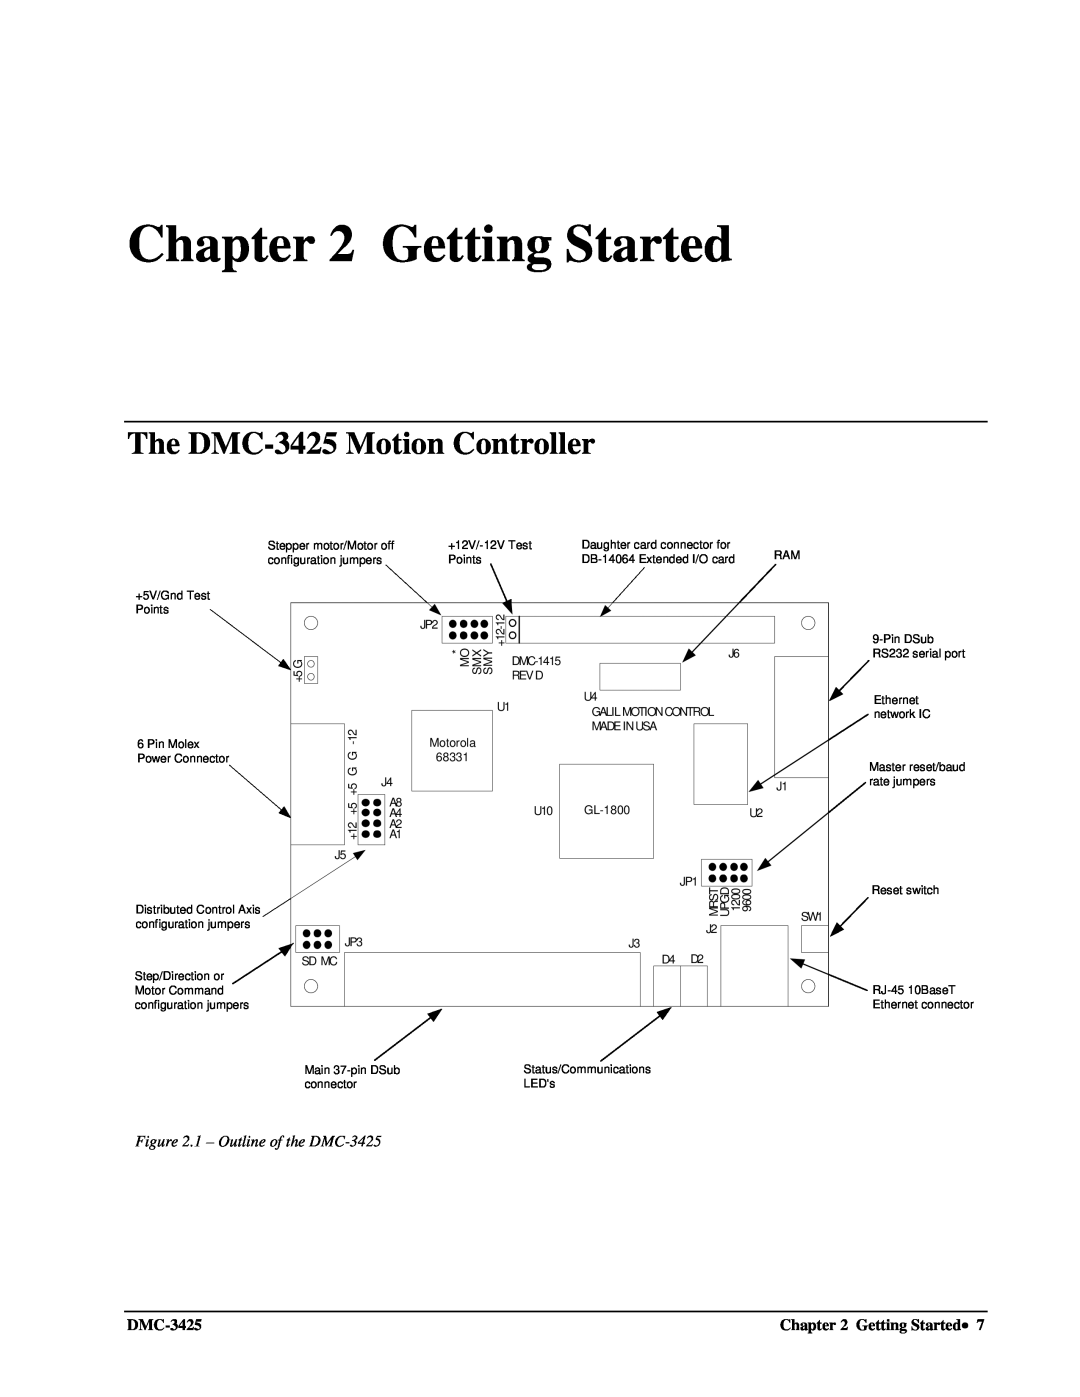 Galil user manual Getting Started, The DMC-3425Motion Controller, 1 – Outline of the DMC-3425 